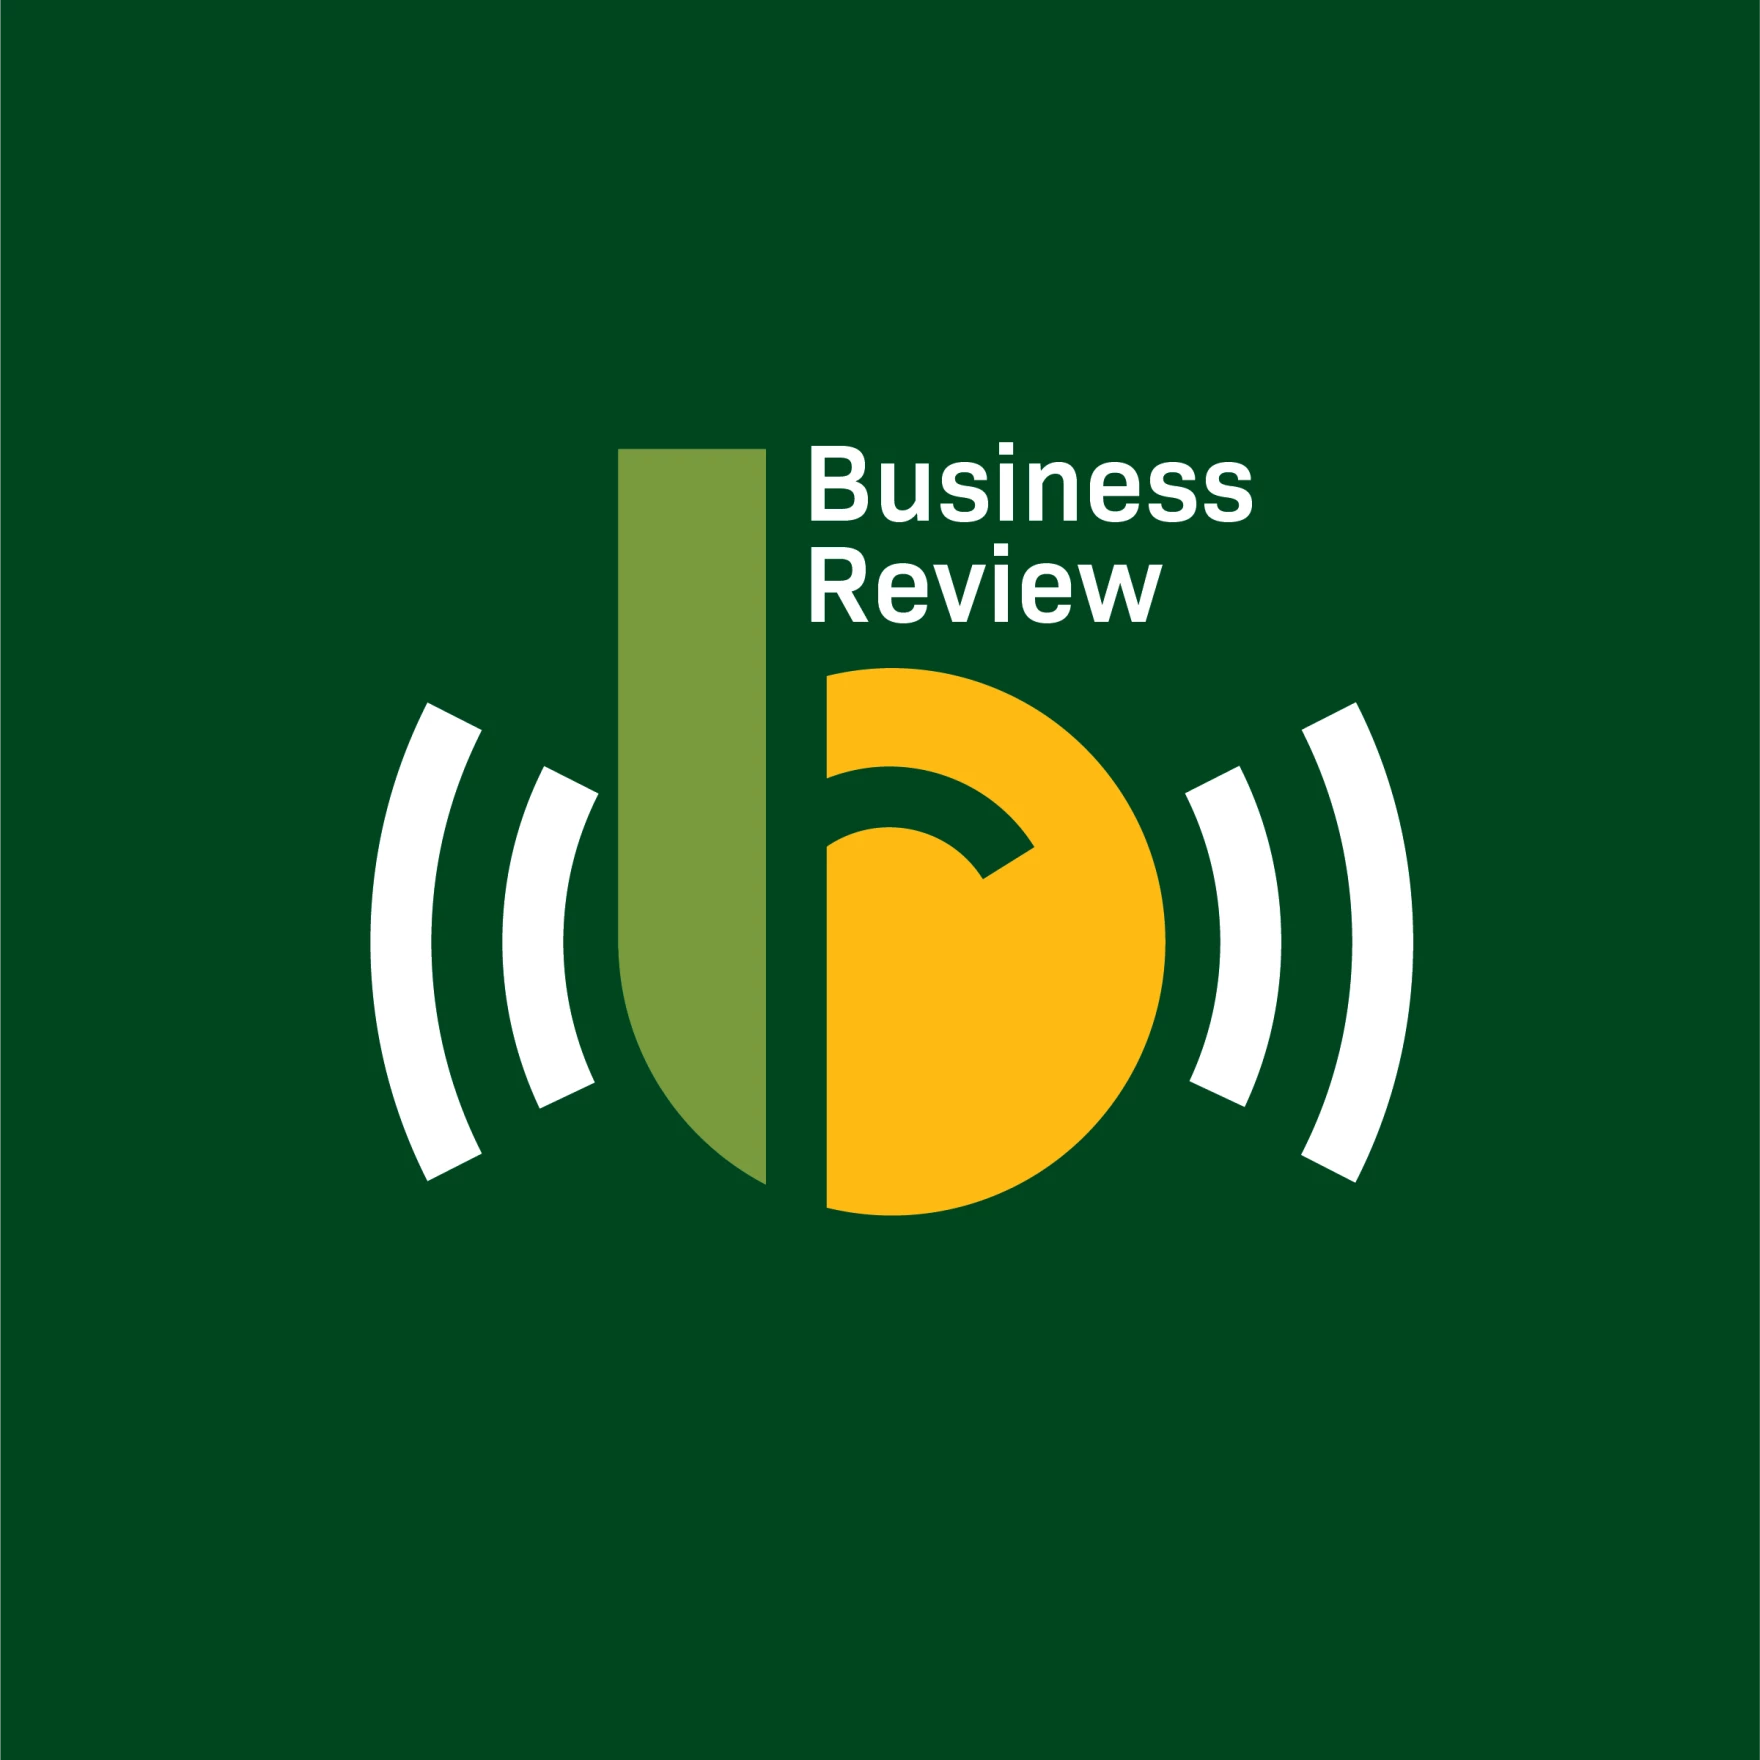 Business Review - Shared Preference